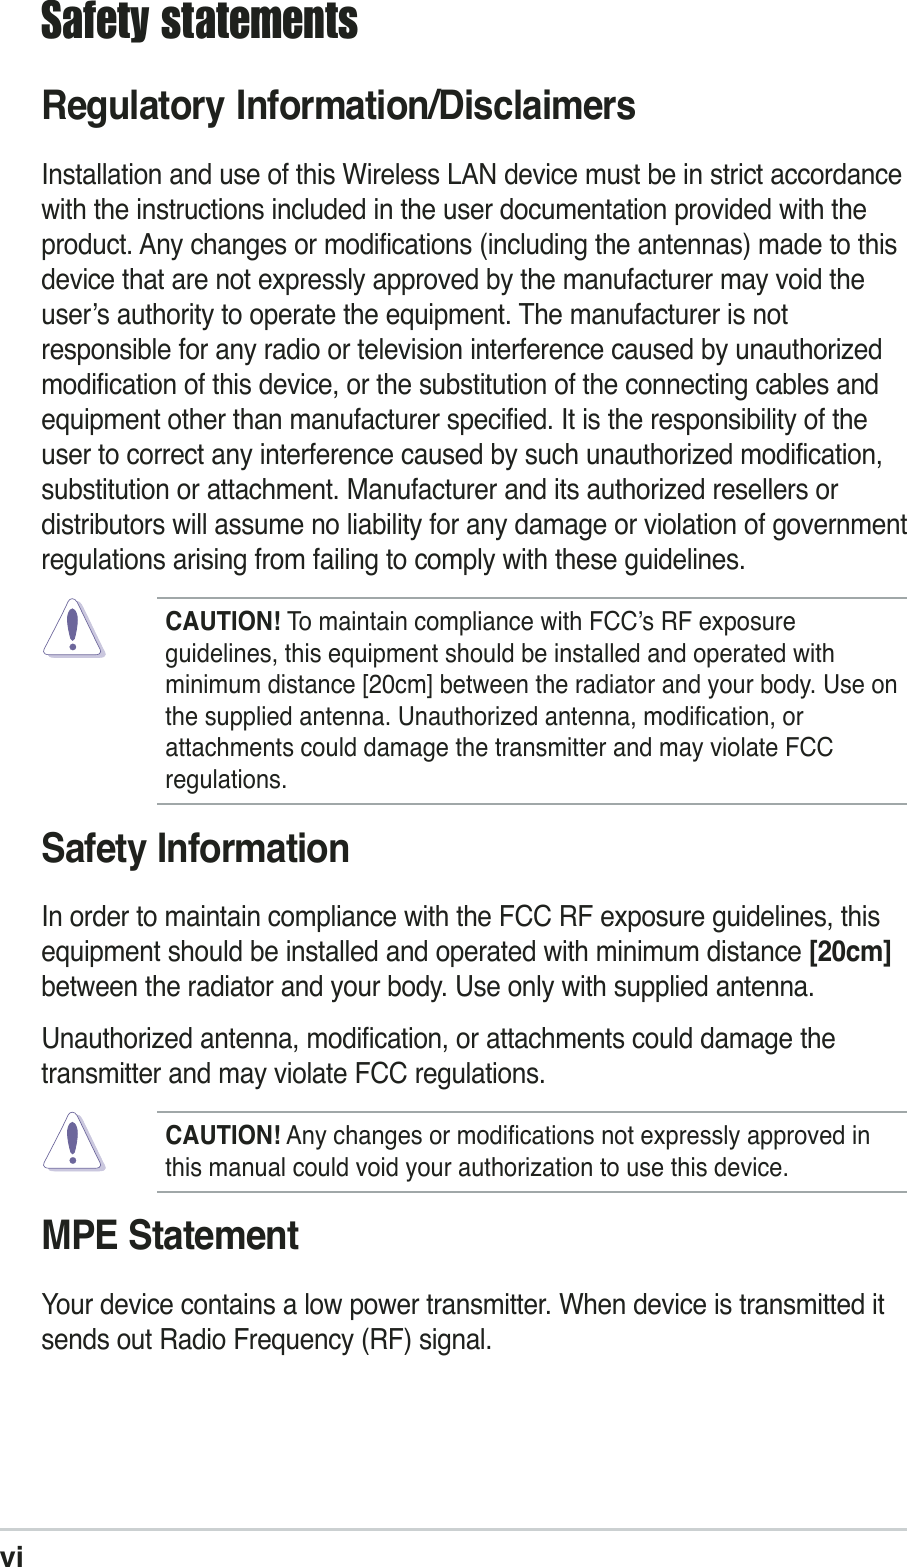 viSafety statementsRegulatory Information/DisclaimersInstallation and use of this Wireless LAN device must be in strict accordancewith the instructions included in the user documentation provided with theproduct. Any changes or modifications (including the antennas) made to thisdevice that are not expressly approved by the manufacturer may void theuser’s authority to operate the equipment. The manufacturer is notresponsible for any radio or television interference caused by unauthorizedmodification of this device, or the substitution of the connecting cables andequipment other than manufacturer specified. It is the responsibility of theuser to correct any interference caused by such unauthorized modification,substitution or attachment. Manufacturer and its authorized resellers ordistributors will assume no liability for any damage or violation of governmentregulations arising from failing to comply with these guidelines.CAUTION! To maintain compliance with FCC’s RF exposureguidelines, this equipment should be installed and operated withminimum distance [20cm] between the radiator and your body. Use onthe supplied antenna. Unauthorized antenna, modification, orattachments could damage the transmitter and may violate FCCregulations.Safety InformationIn order to maintain compliance with the FCC RF exposure guidelines, thisequipment should be installed and operated with minimum distance [20cm]between the radiator and your body. Use only with supplied antenna.Unauthorized antenna, modification, or attachments could damage thetransmitter and may violate FCC regulations.CAUTION! Any changes or modifications not expressly approved inthis manual could void your authorization to use this device.MPE StatementYour device contains a low power transmitter. When device is transmitted itsends out Radio Frequency (RF) signal.